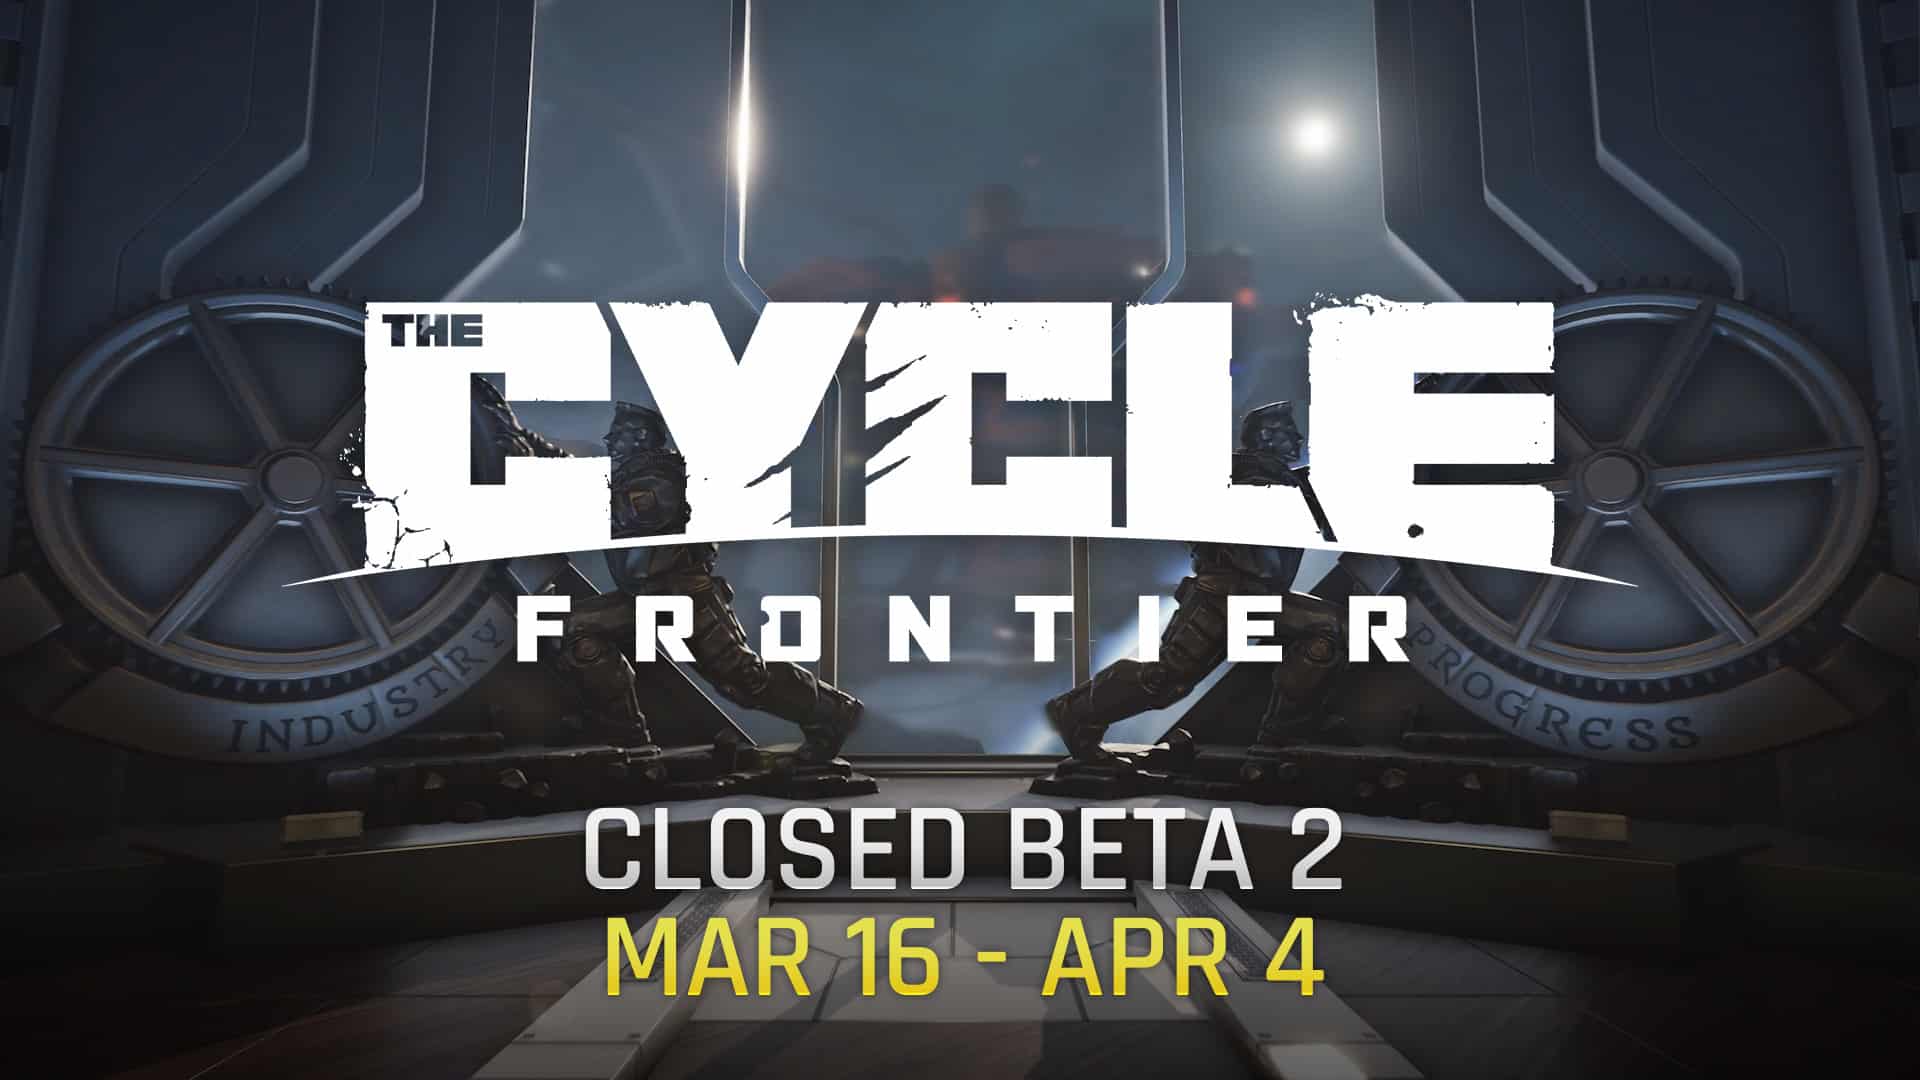 thecycle closed beta 2 delay